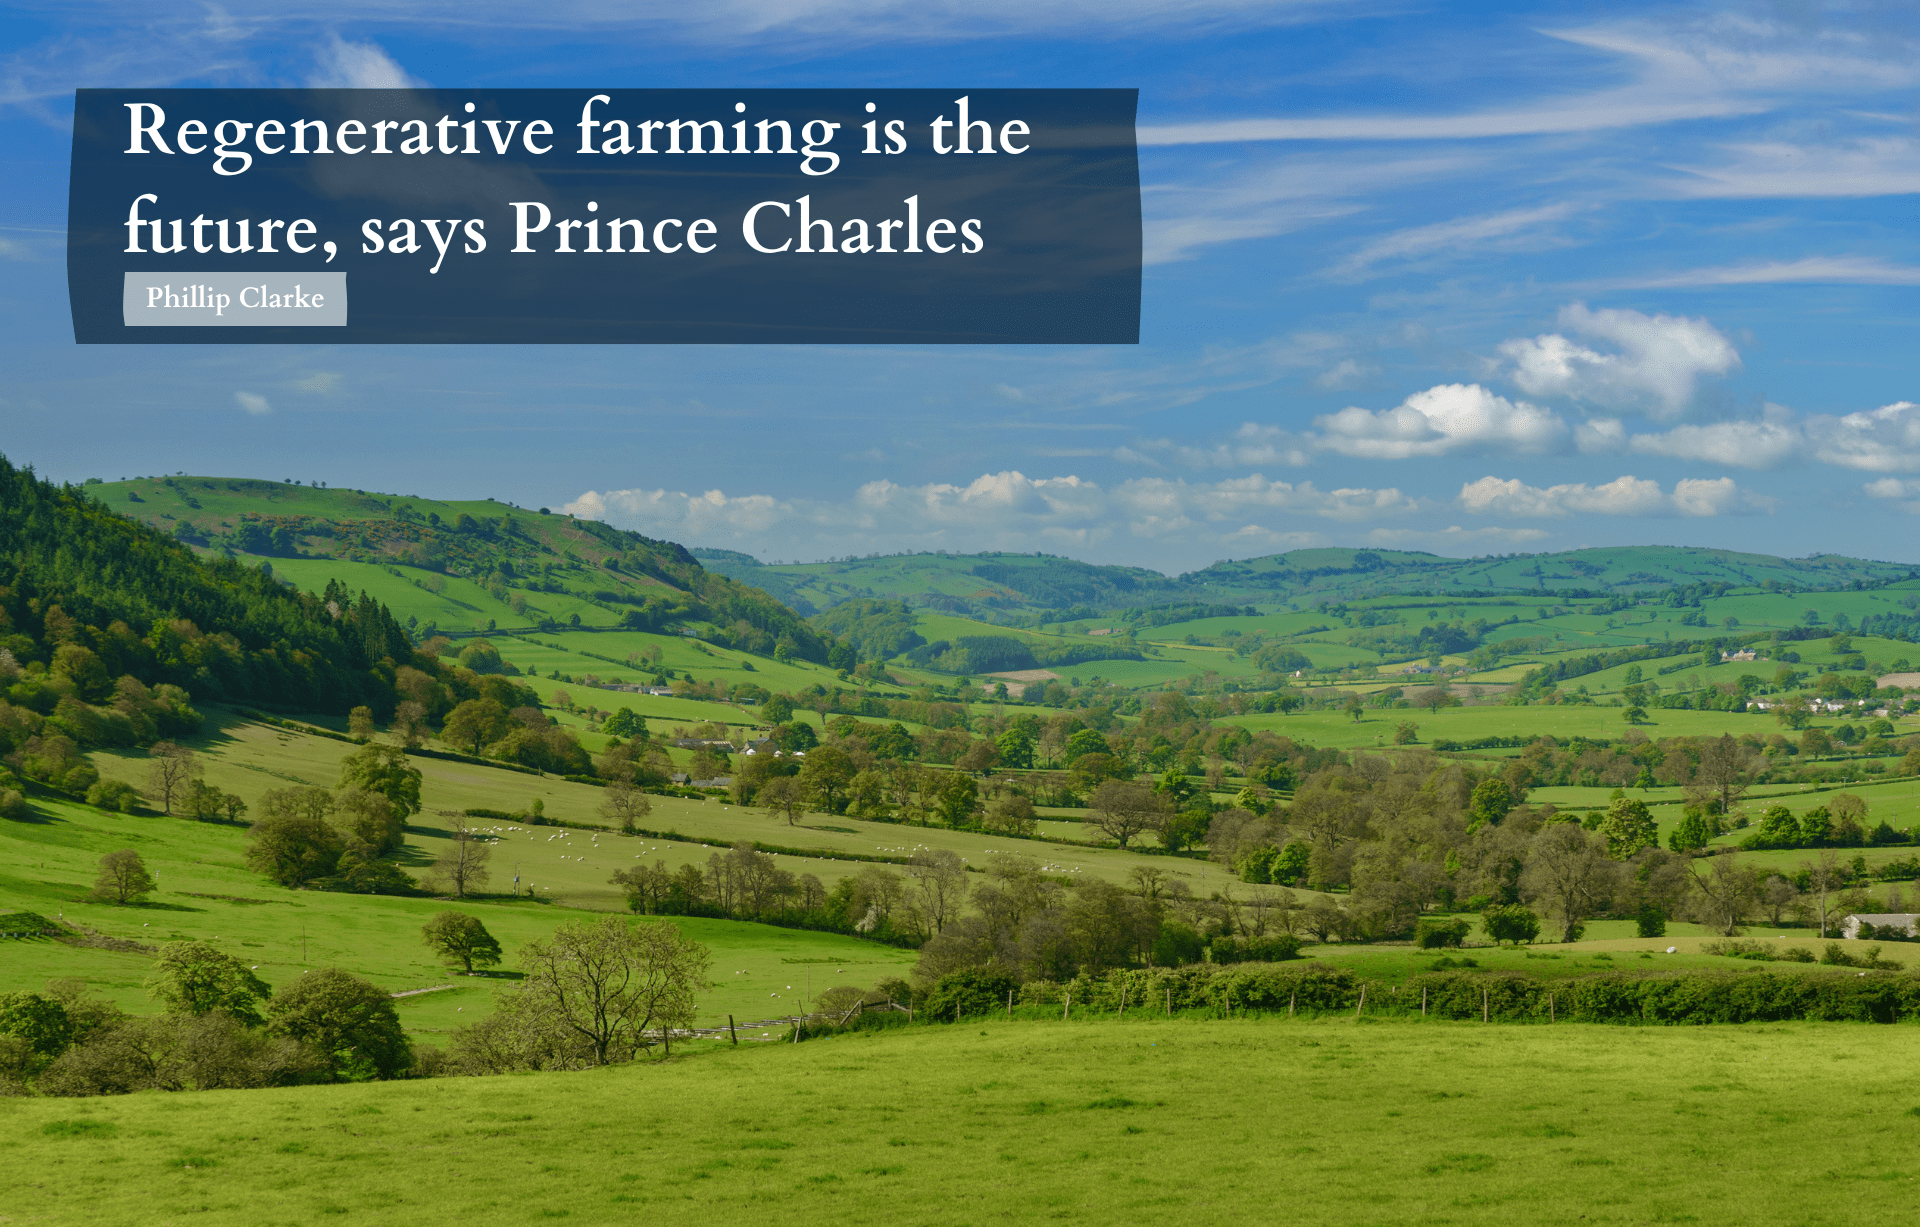 Regenerative farming is the future, says Prince Charles